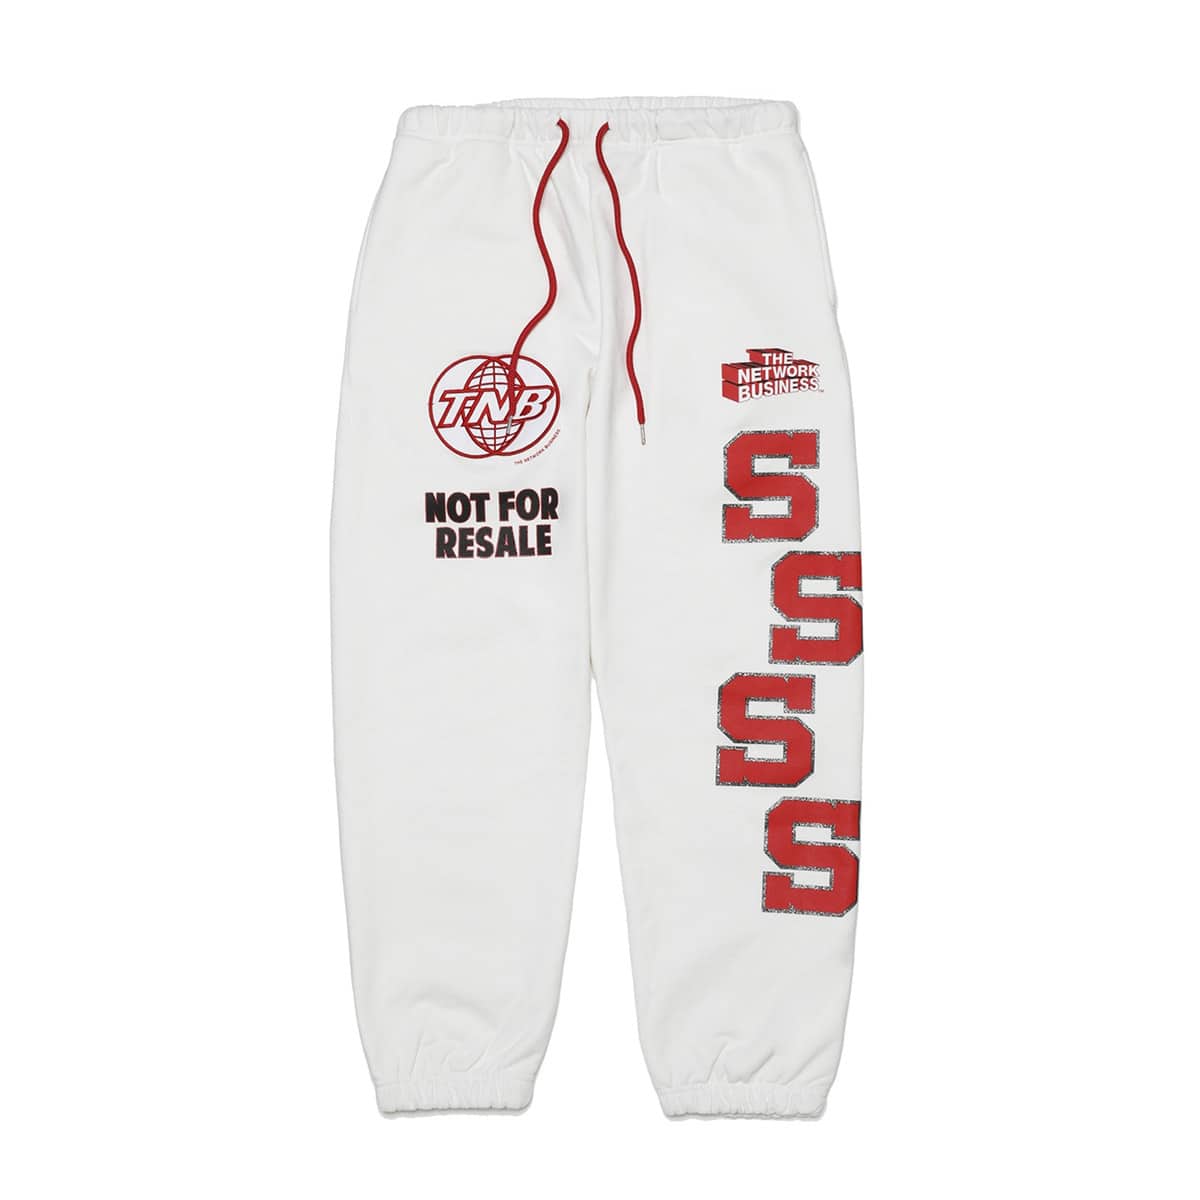 THE NETWORK BUSINESS Sweat Pants Carmine WHITE 21SP-S